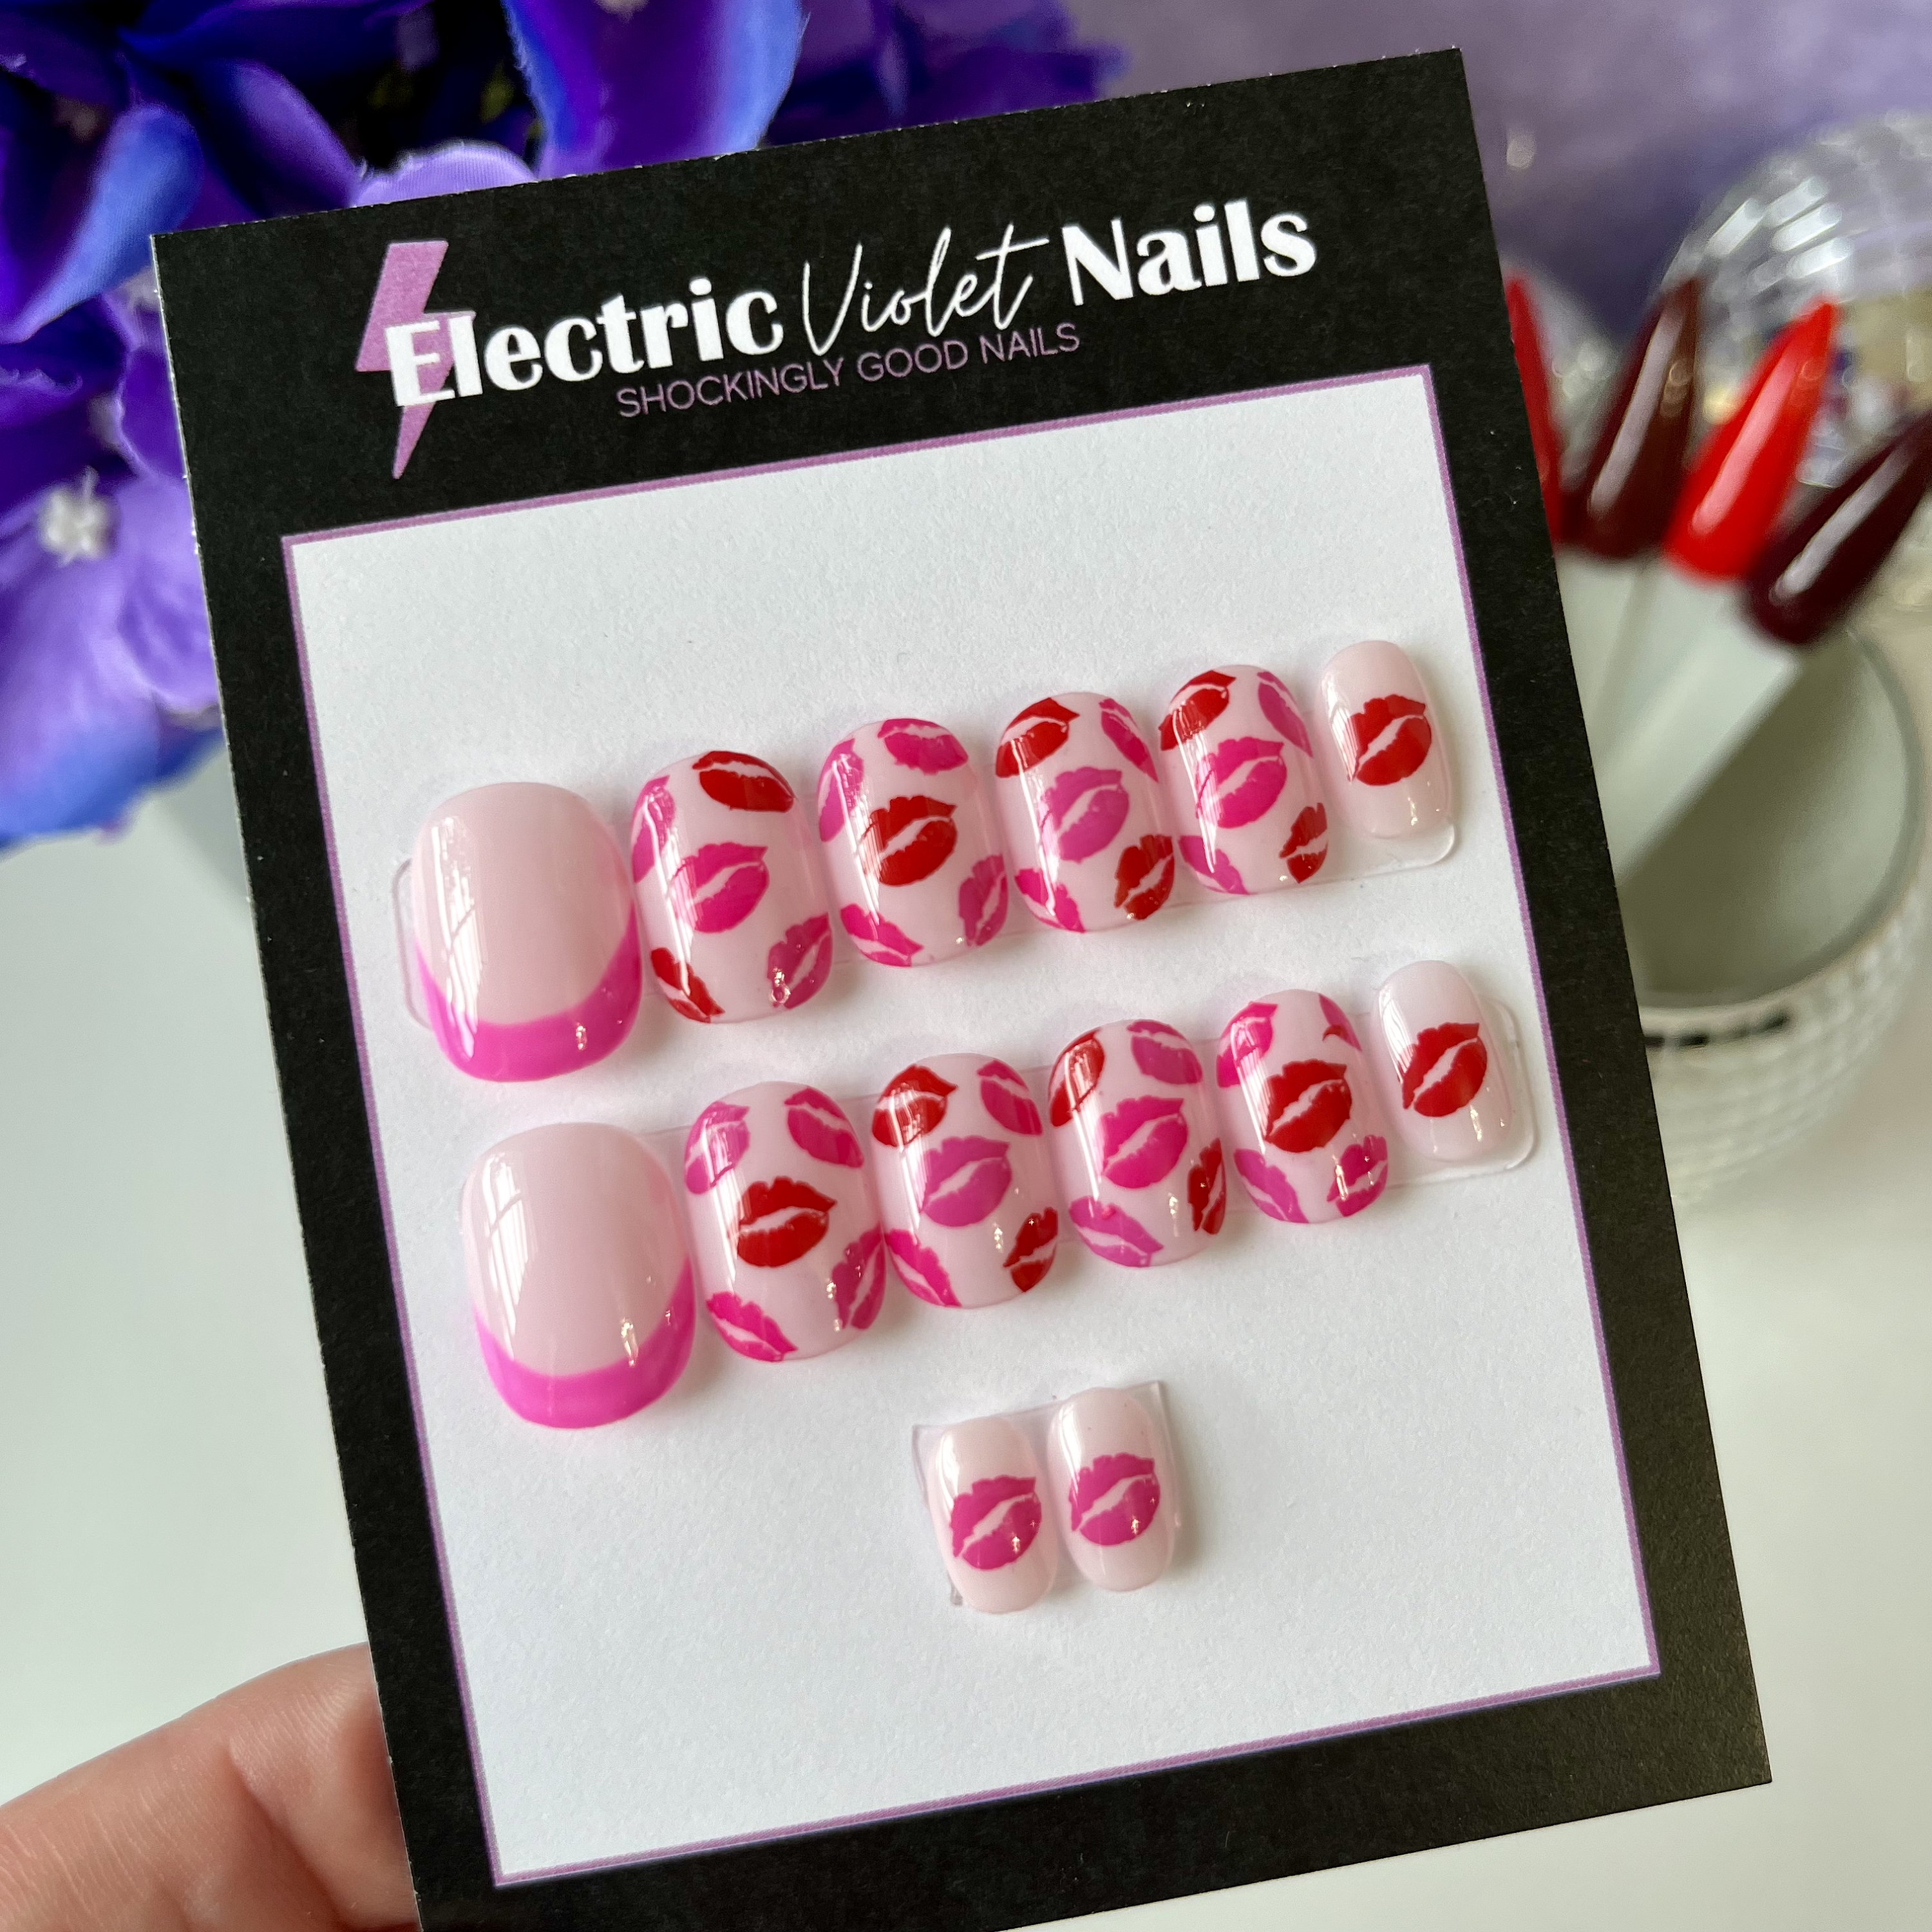 FLOWERZ Child-press on Nails-flowers Nail Art-french Nails-luxury Nails-fake  Nails-gel X Nails-long Short Nails-almond Coffin Nails, Spring 